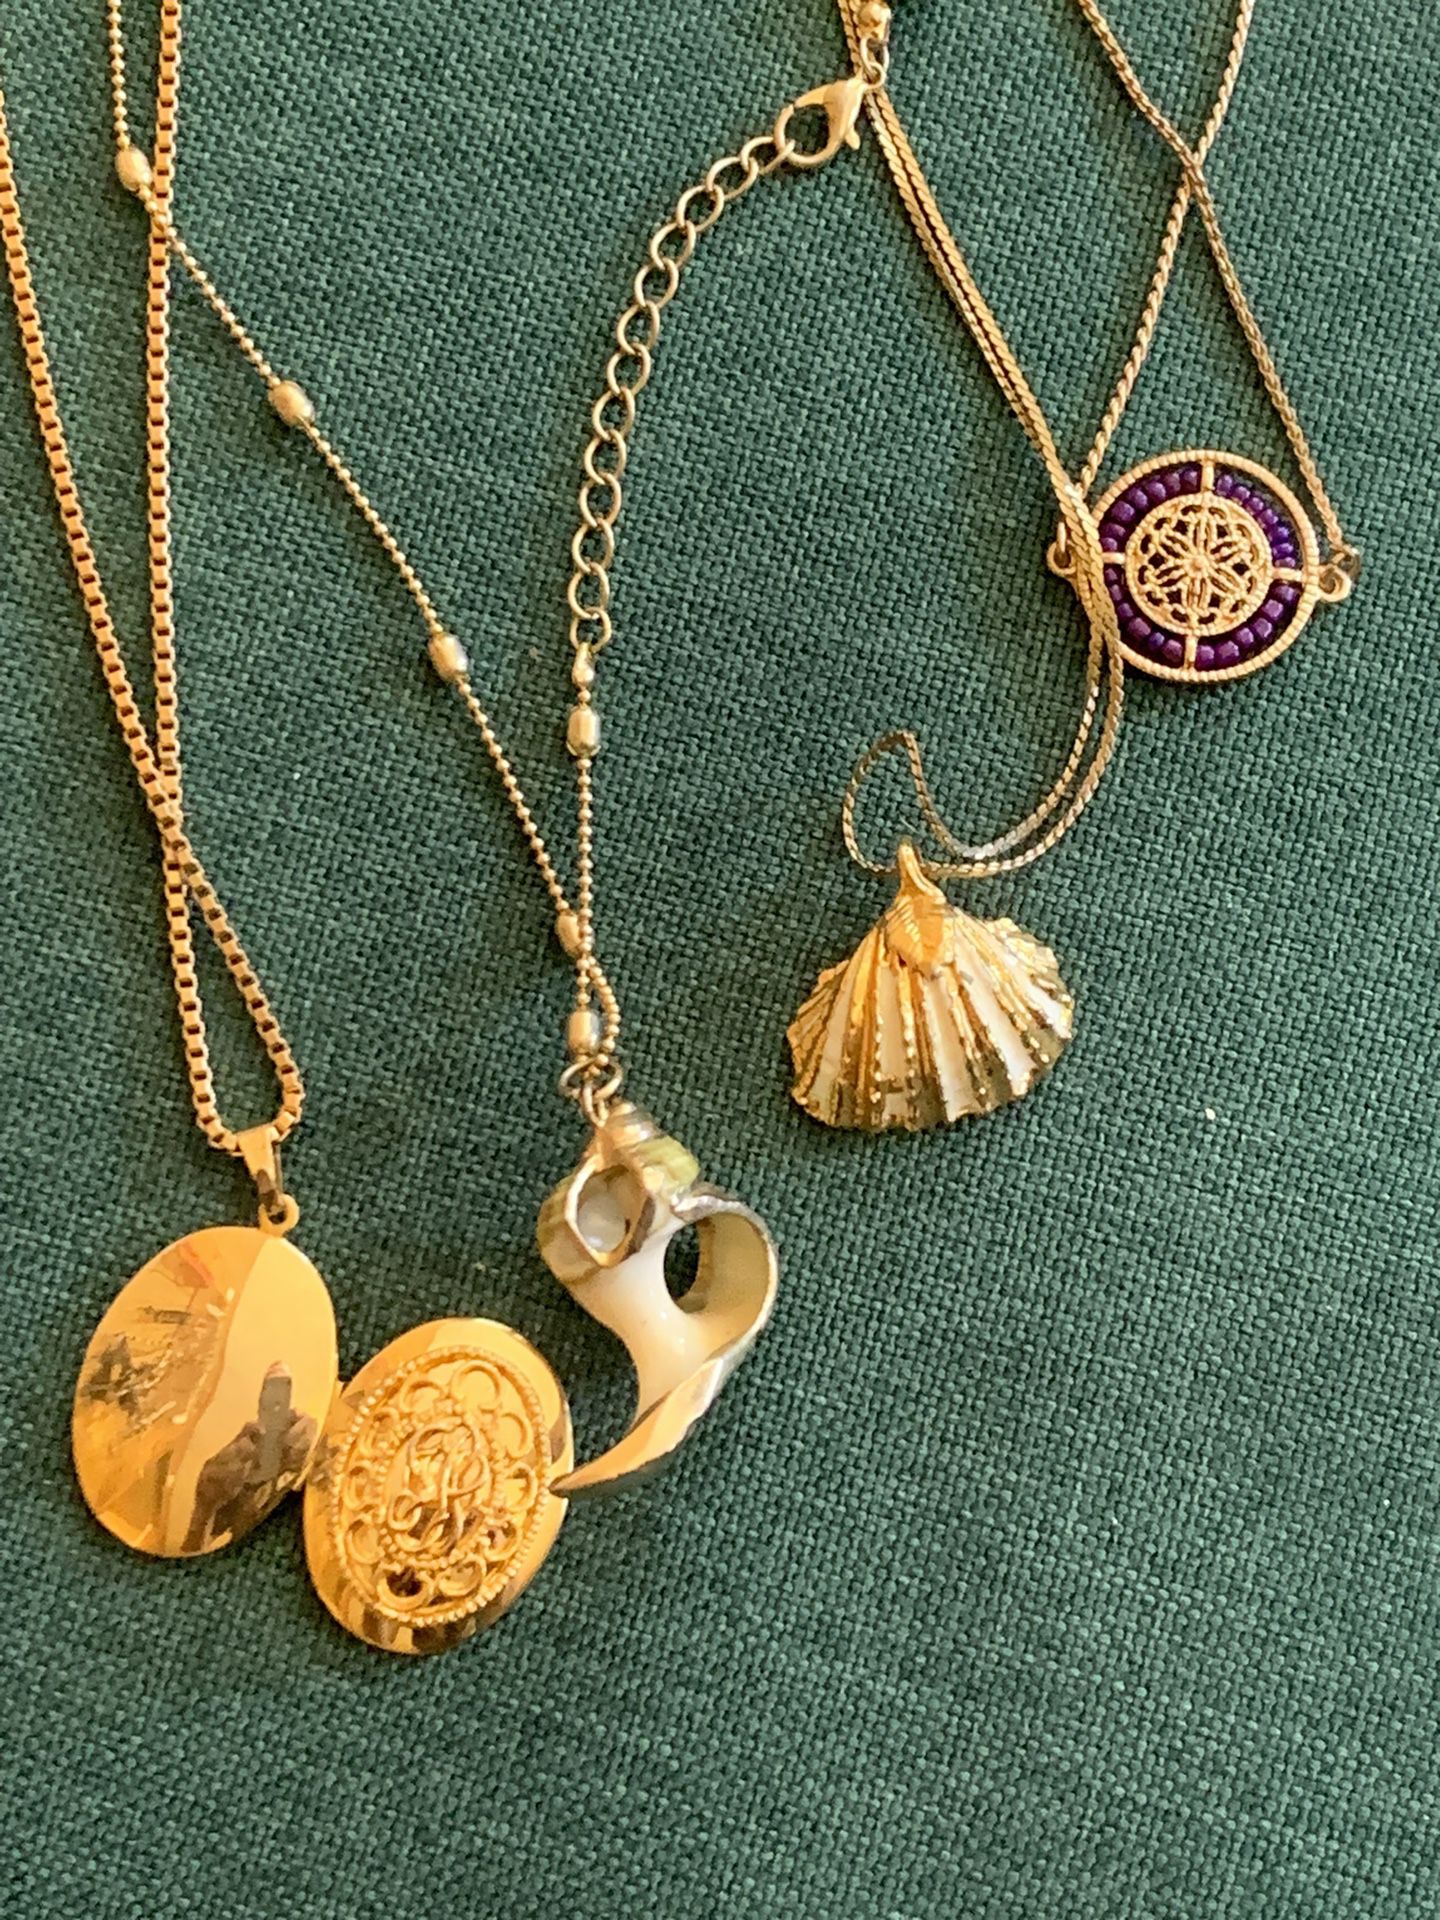 Gold Plated Sea Shell 🐚 And Locket Necklaces +bracelet 